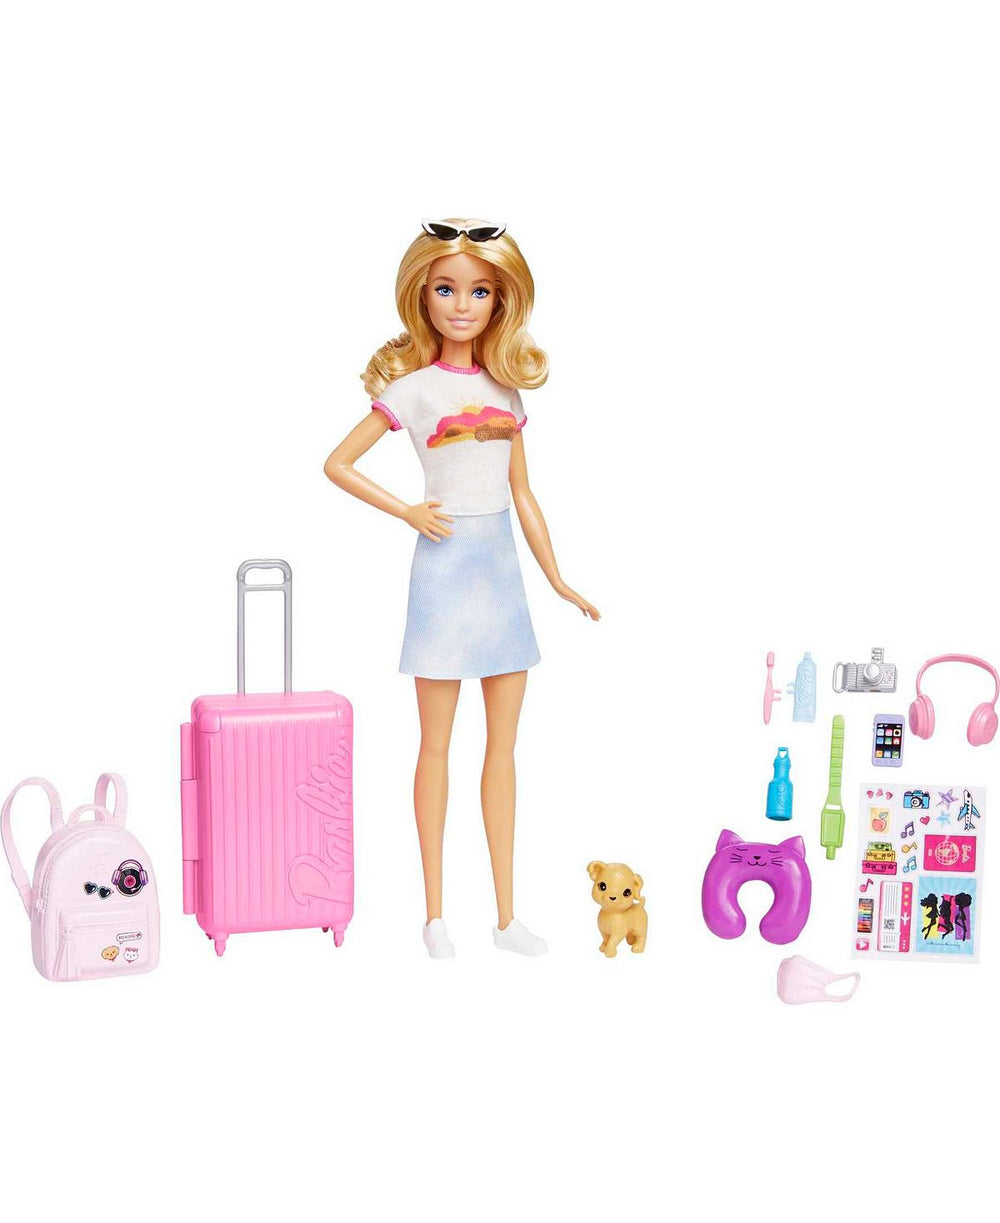 Barbie Malibu Travel Set with Puppy and Accessories